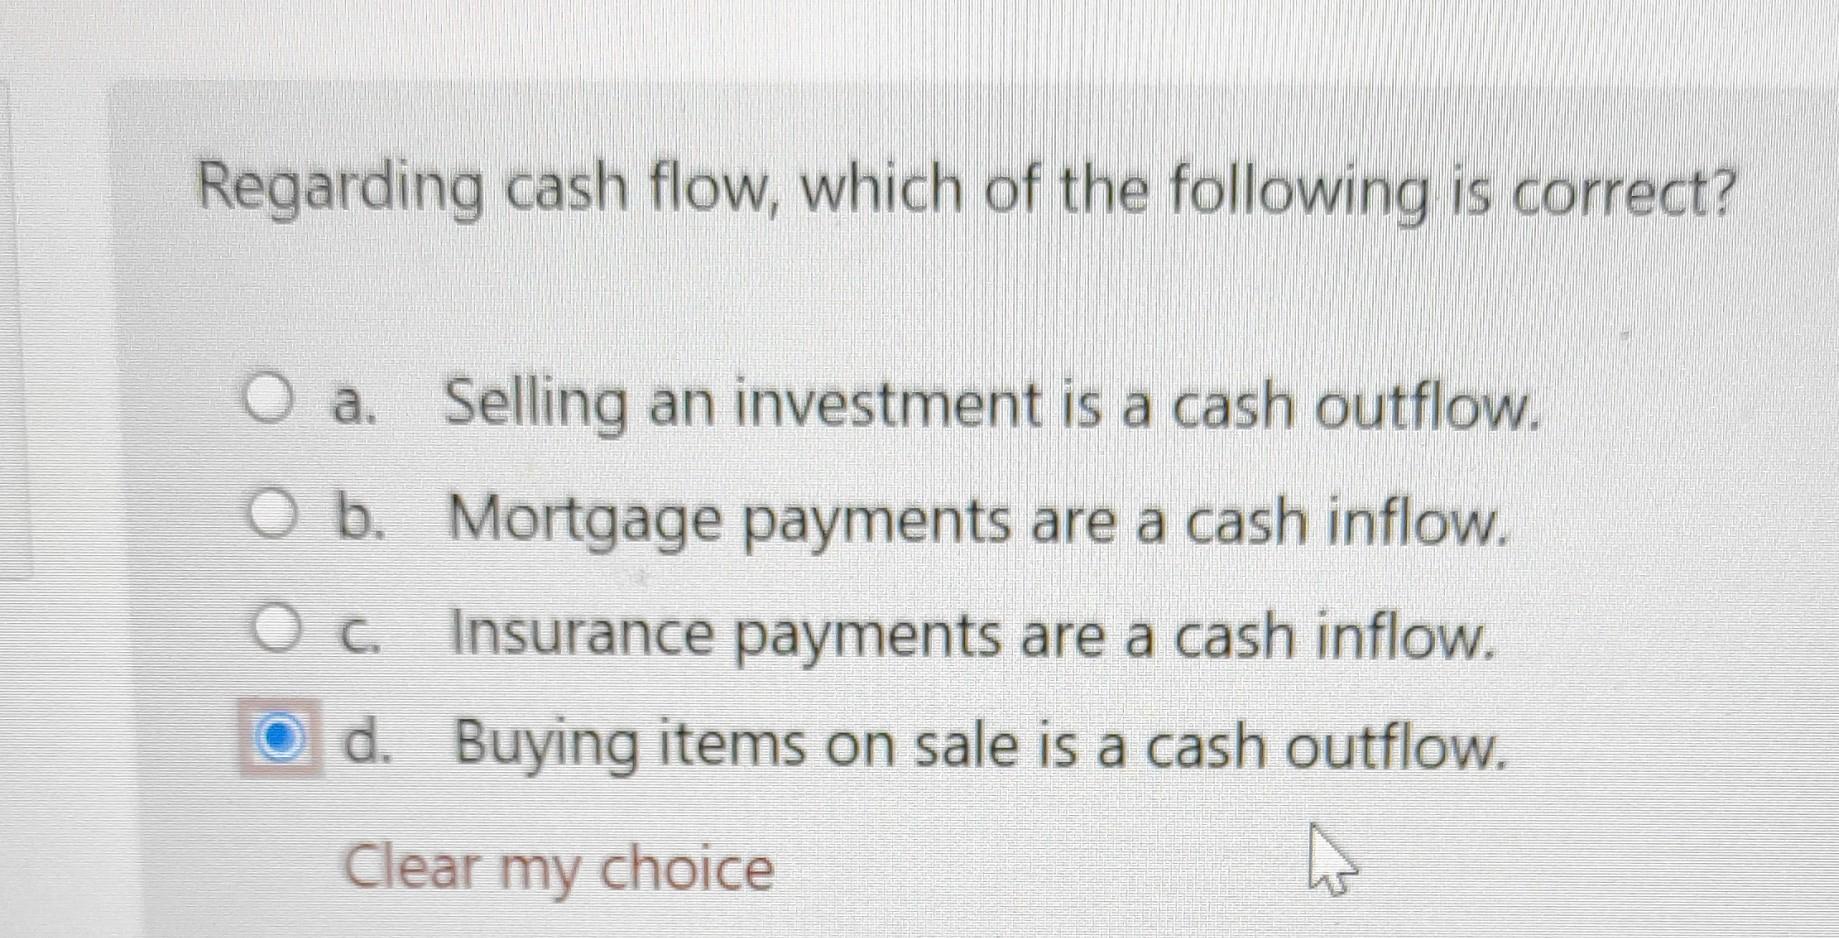 Regarding cash flow, which of the following is correct? O a. Selling an investment is a cash outflow. O b. Mortgage payments